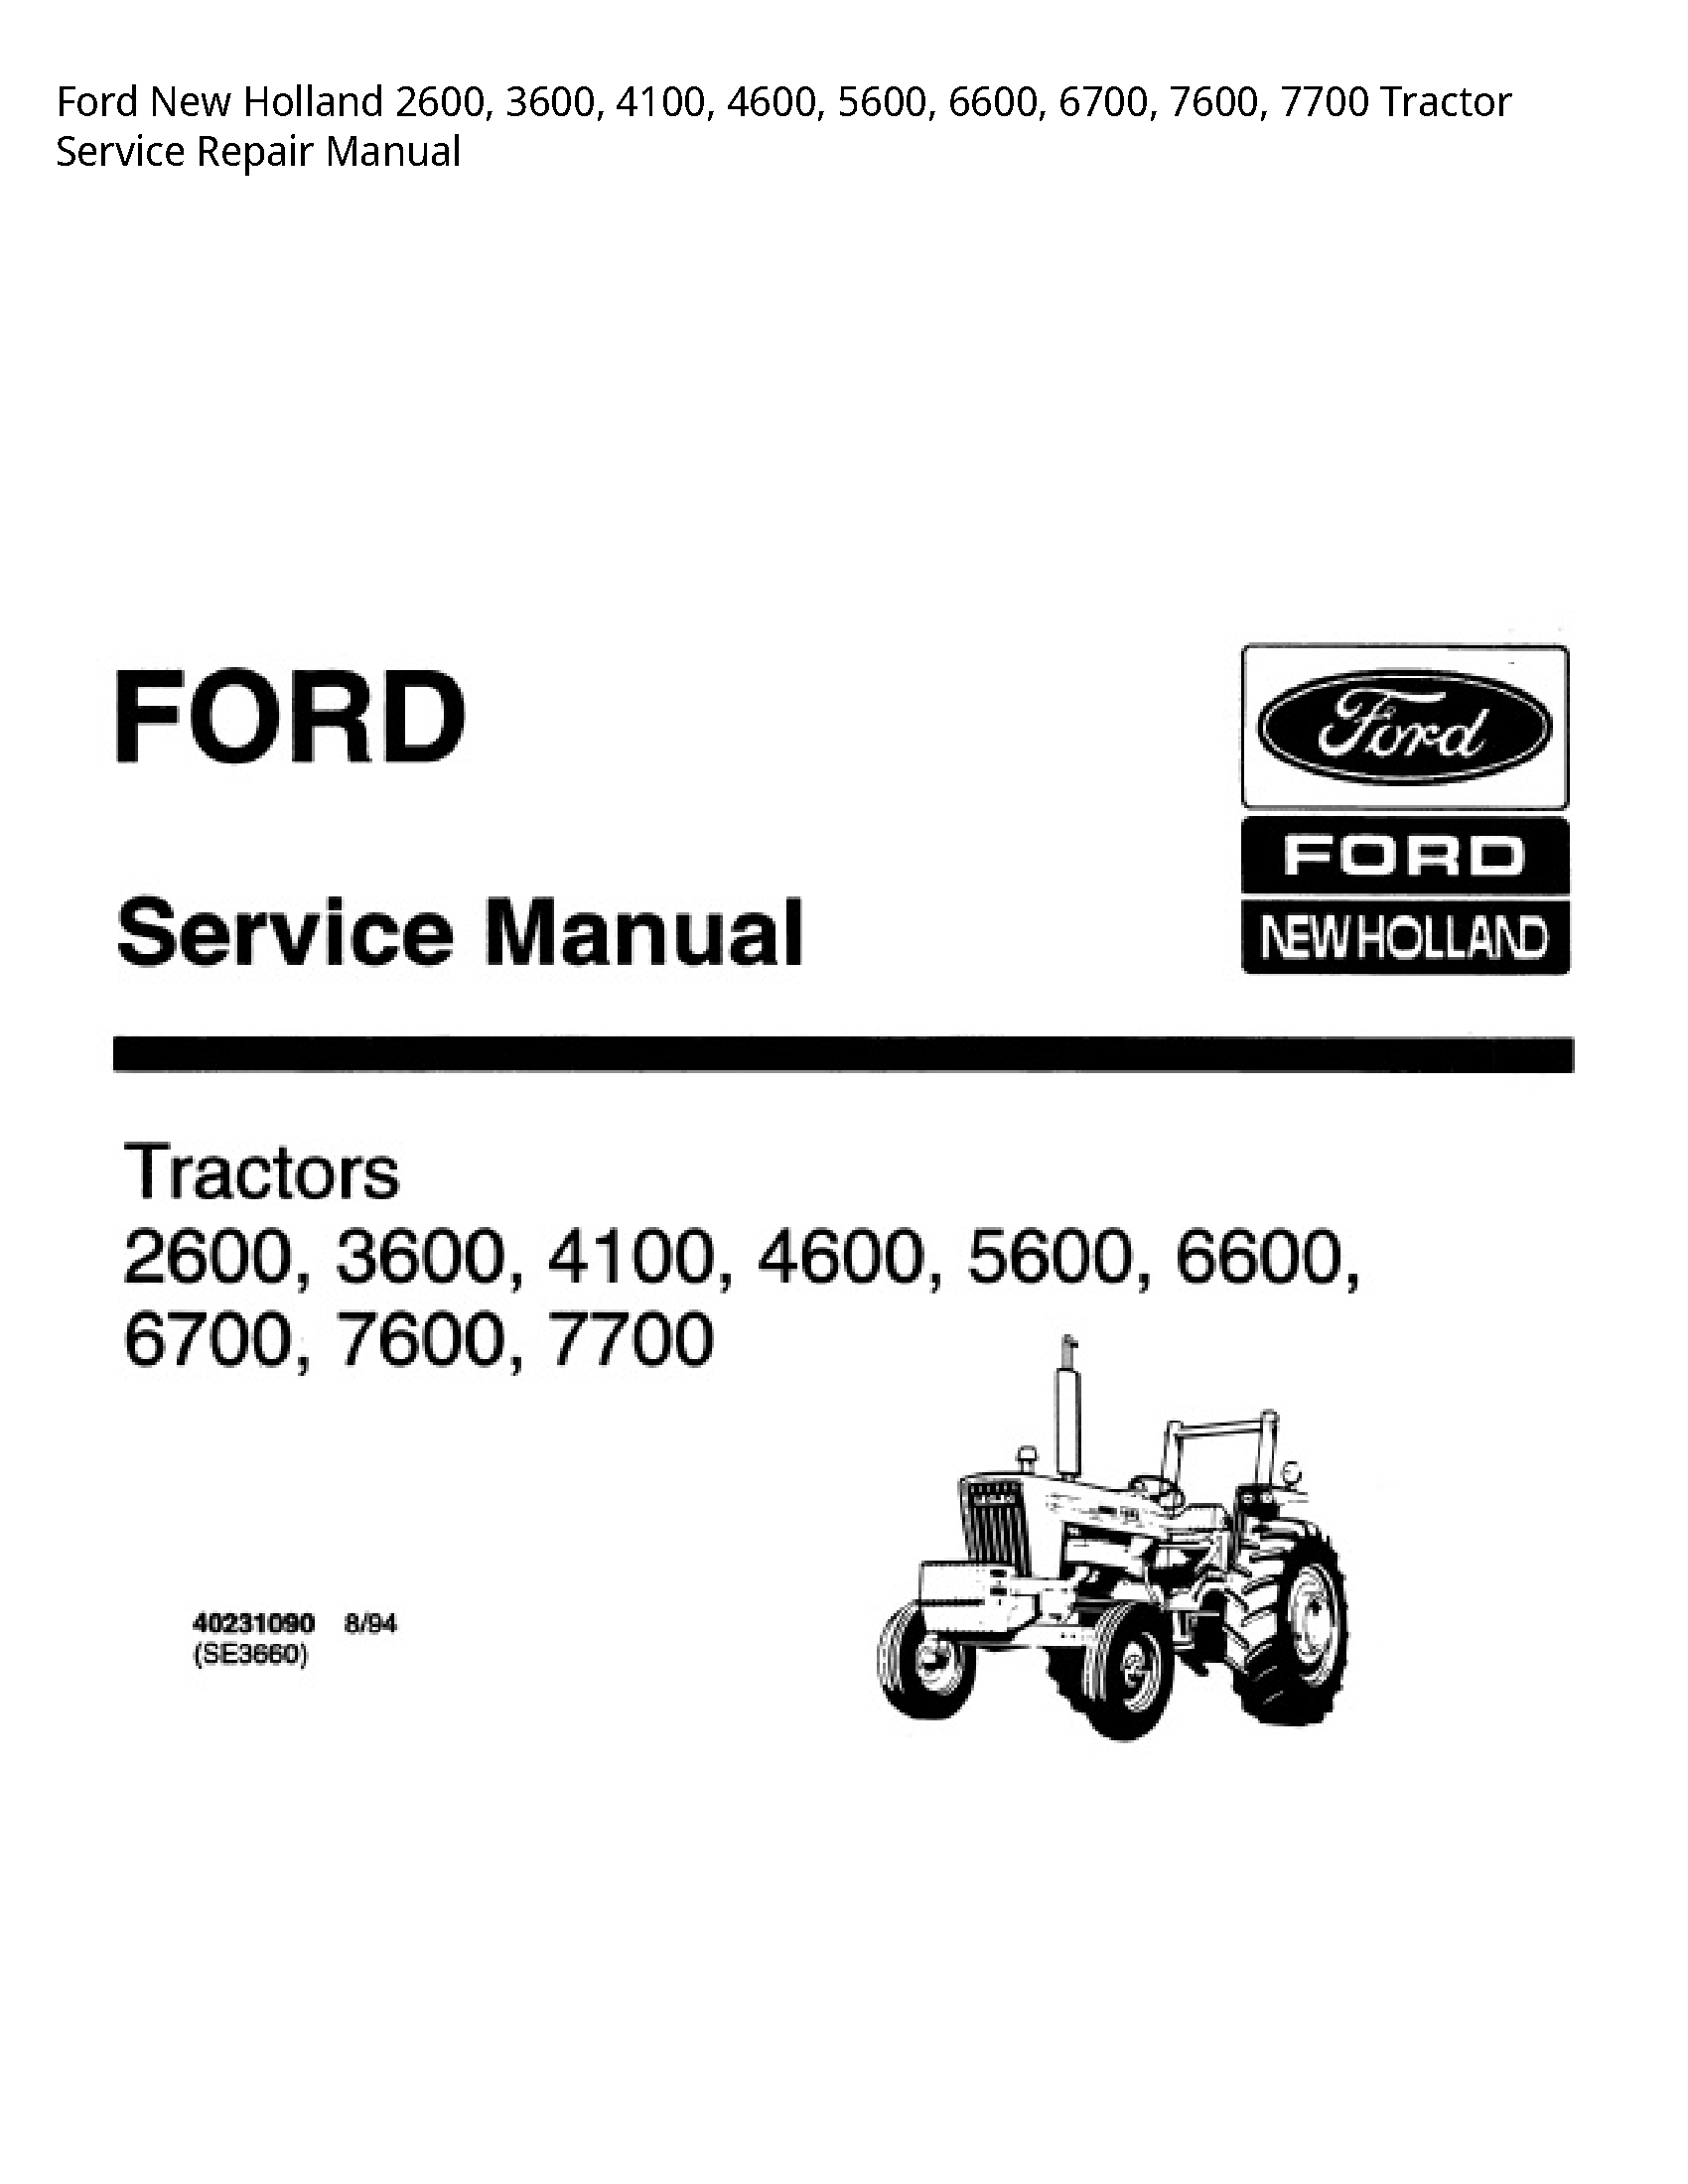  2600 Tractor manual